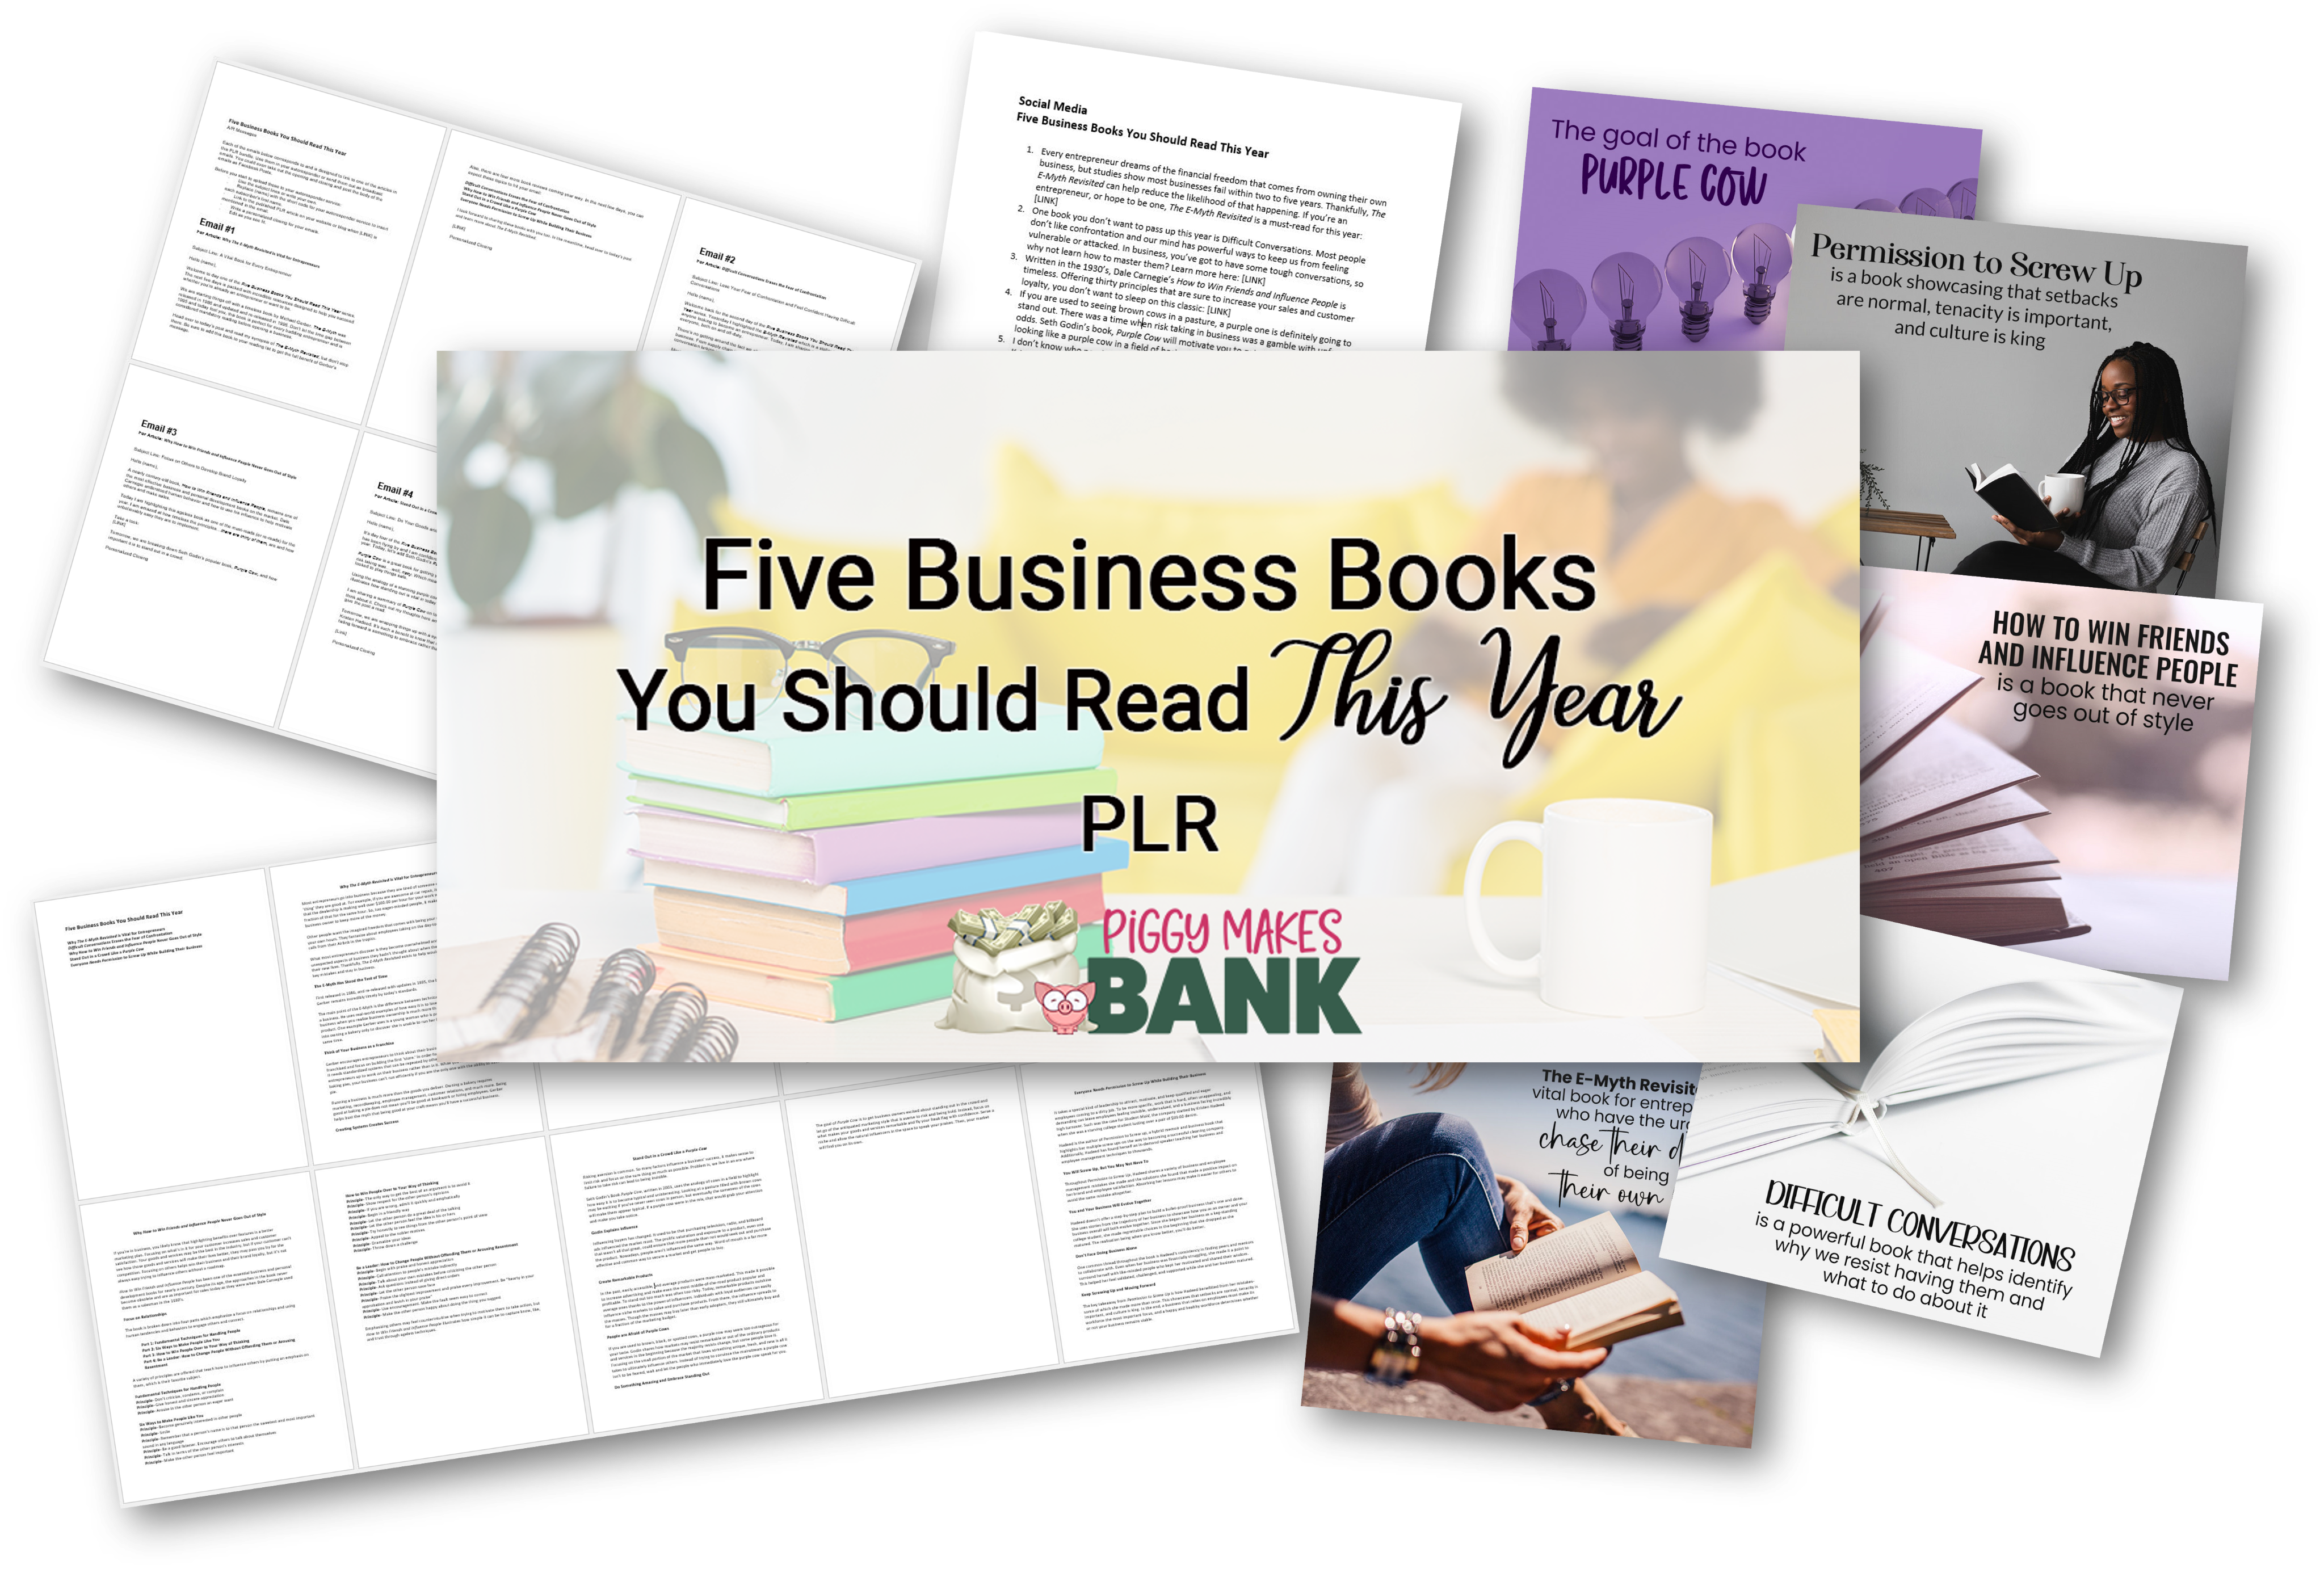 Five Business Books You Should Read This Year PLR